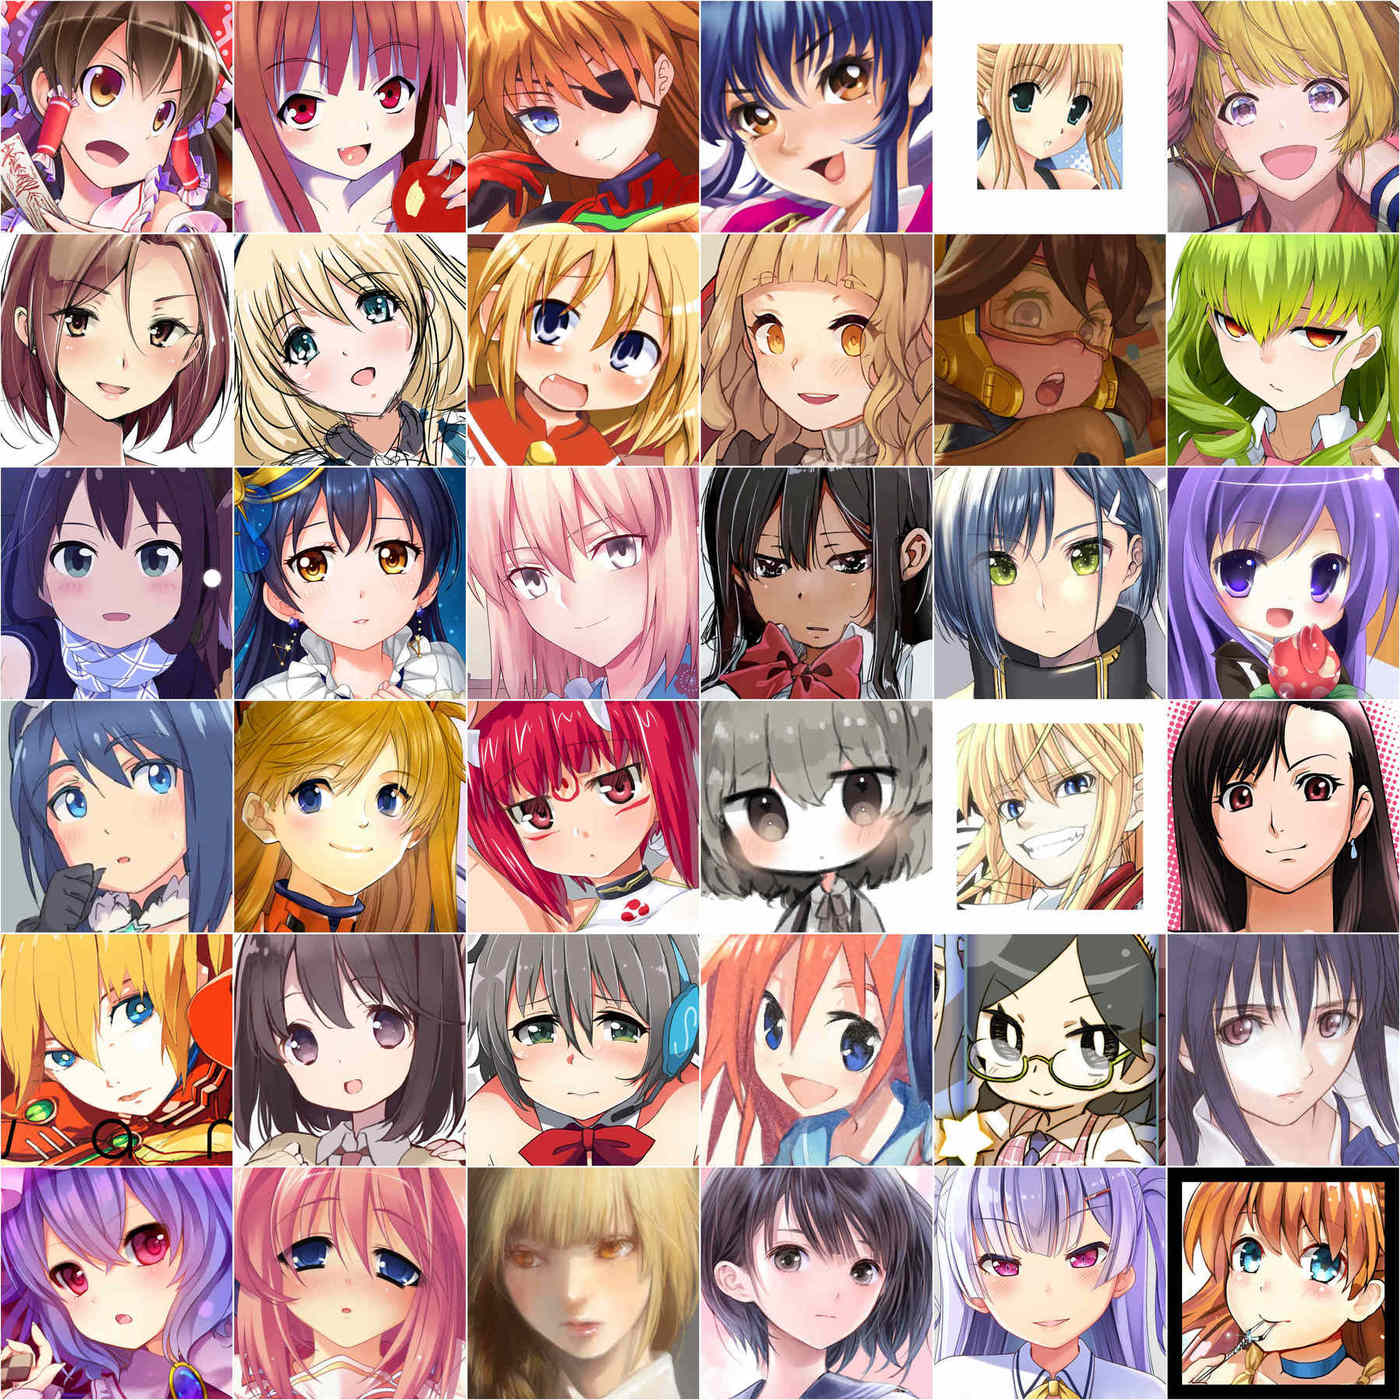 36 random real sample images from the cropped Danbooru faces in a 6×6 grid.